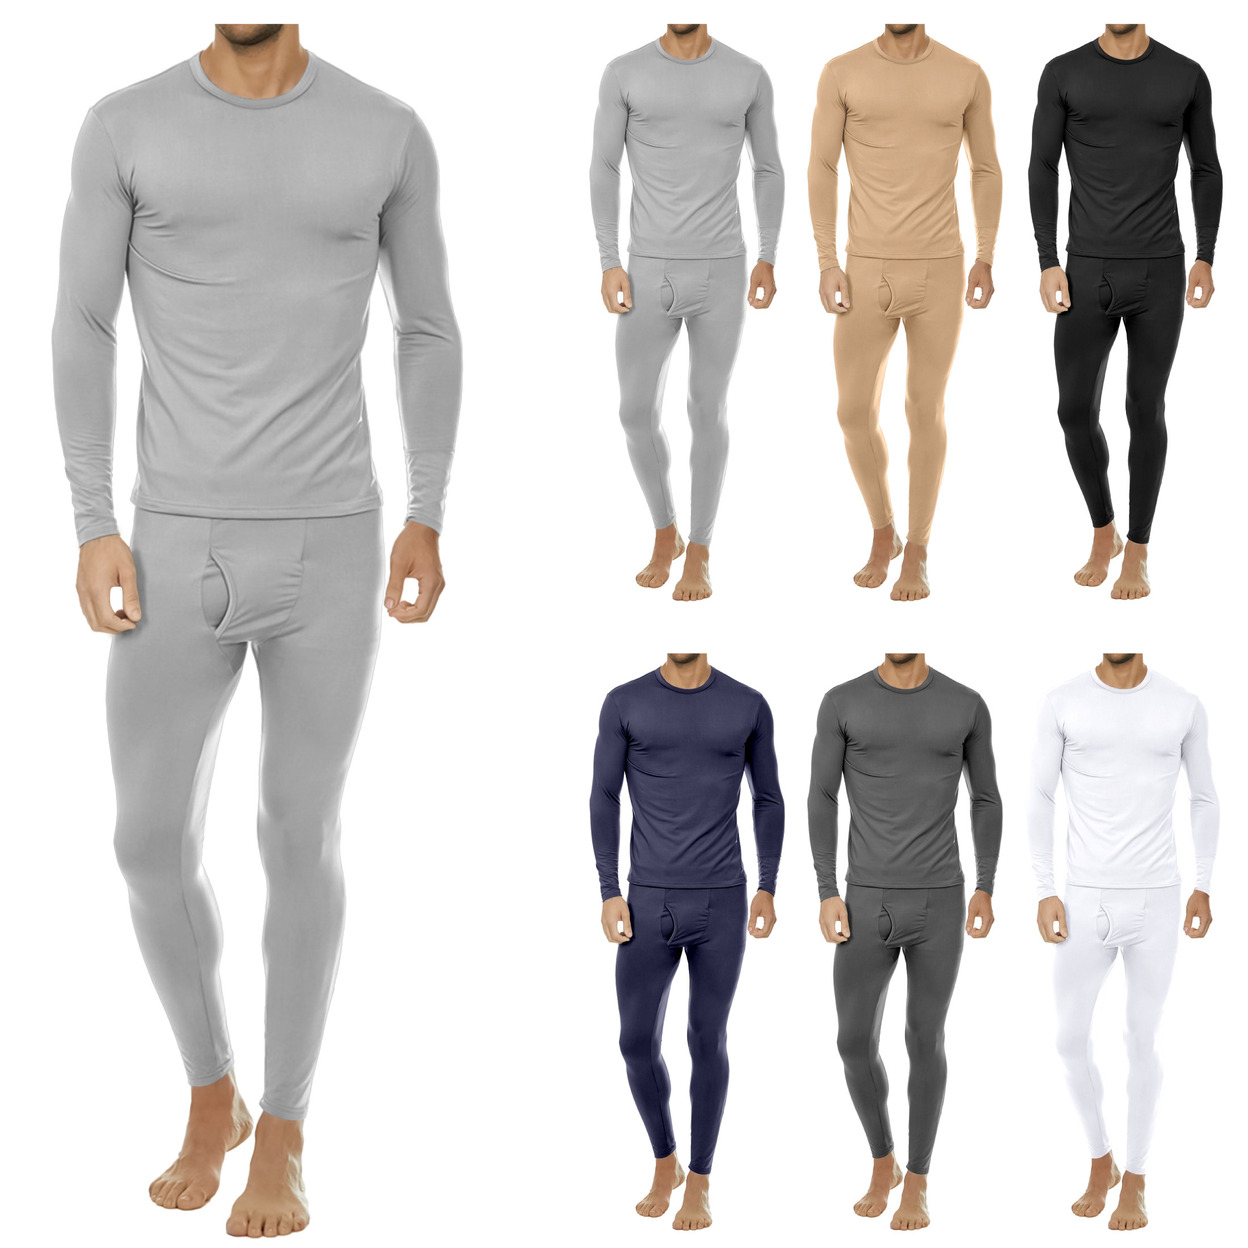 2-Sets: Men's Winter Warm Fleece Lined Thermal Underwear Set For Cold Weather - Grey&white, Medium